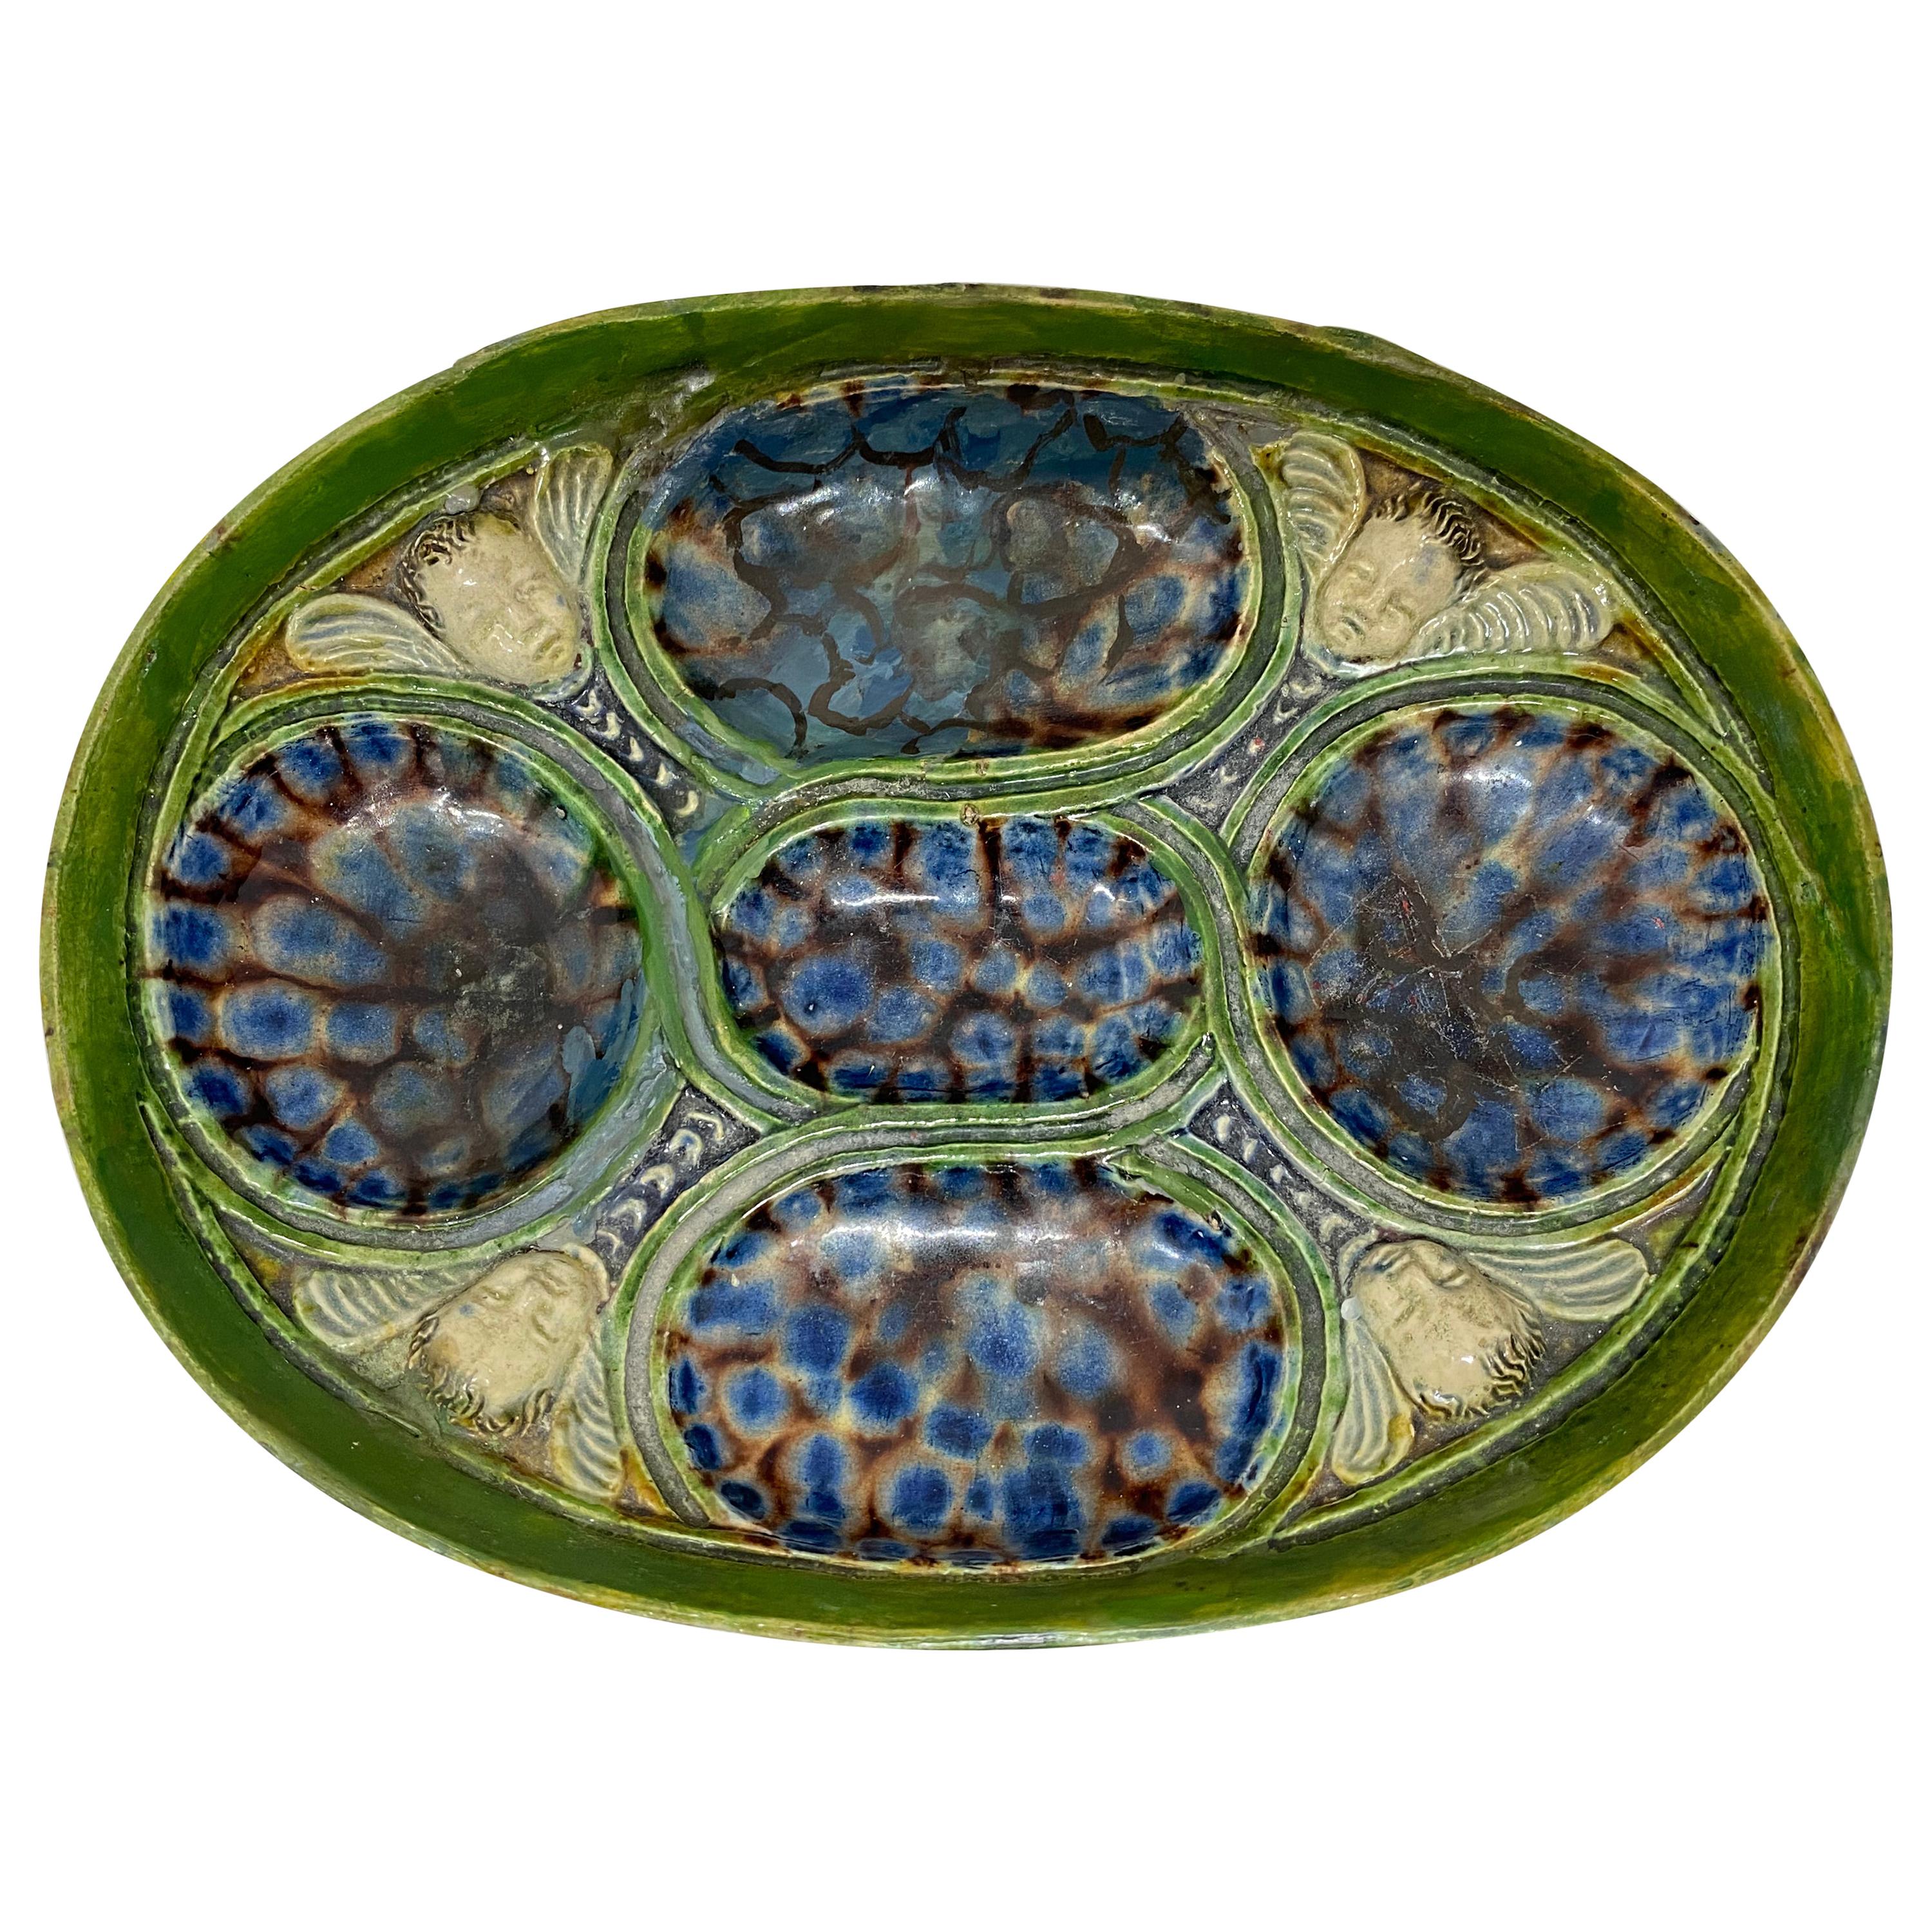 Oval Dish with Winged Putti, After Bernard Palissy, French, 17th Century For Sale